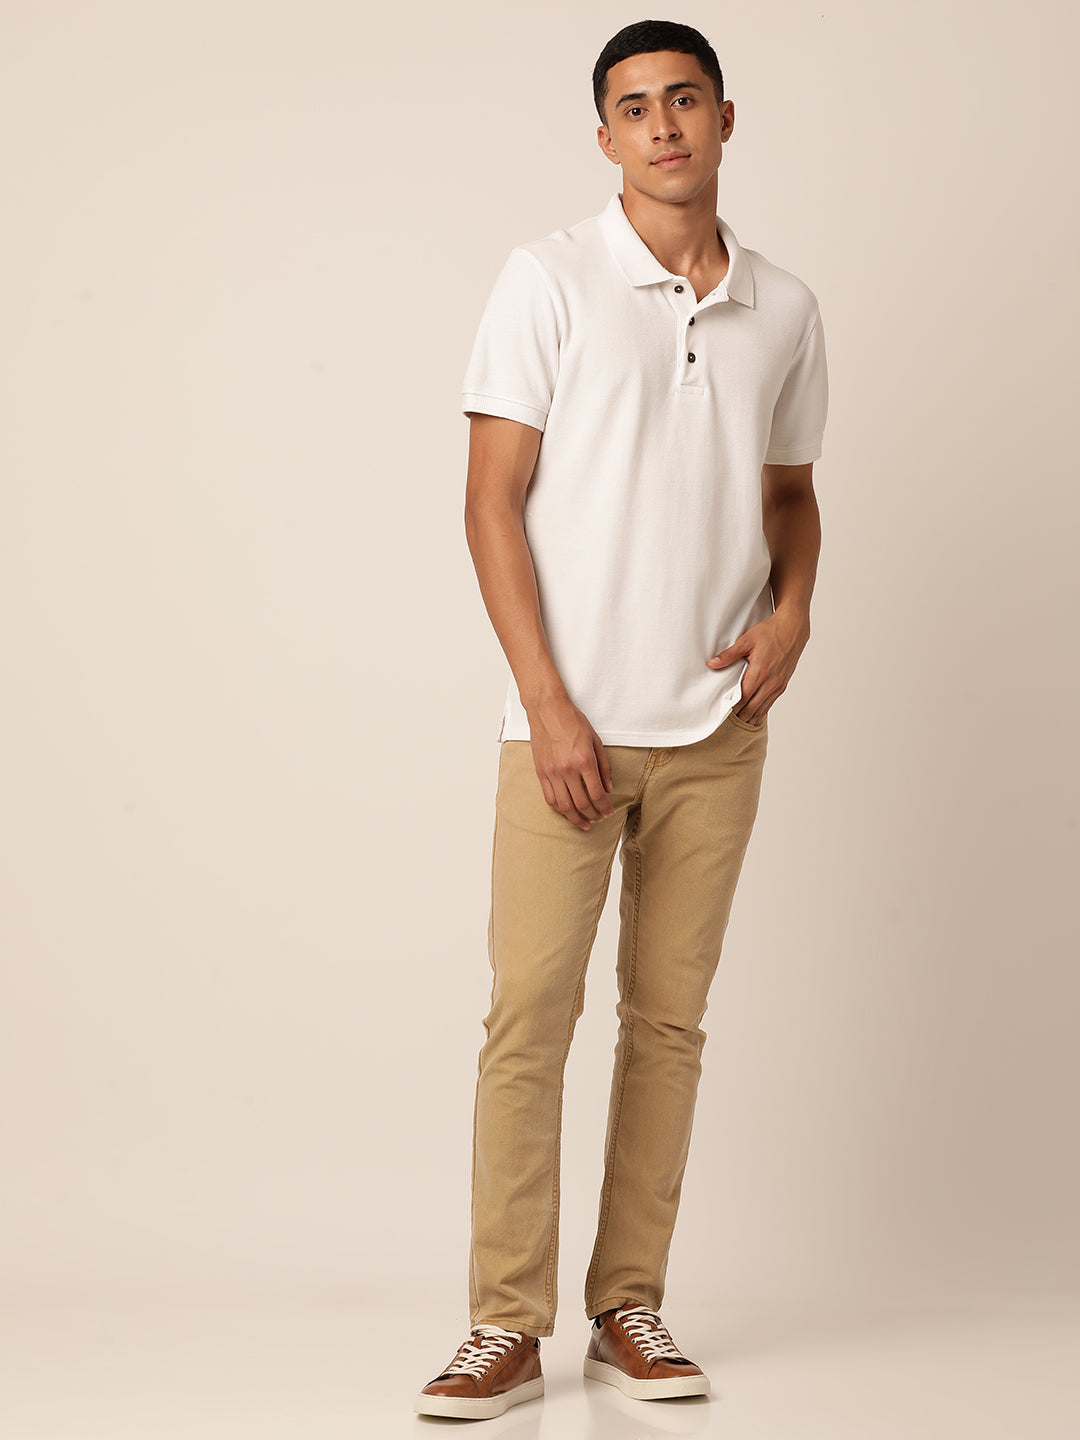 Casual outfit White shirt and sneakers matching with khaki chinos  Mens  clothing styles Casual outfits Khaki chinos